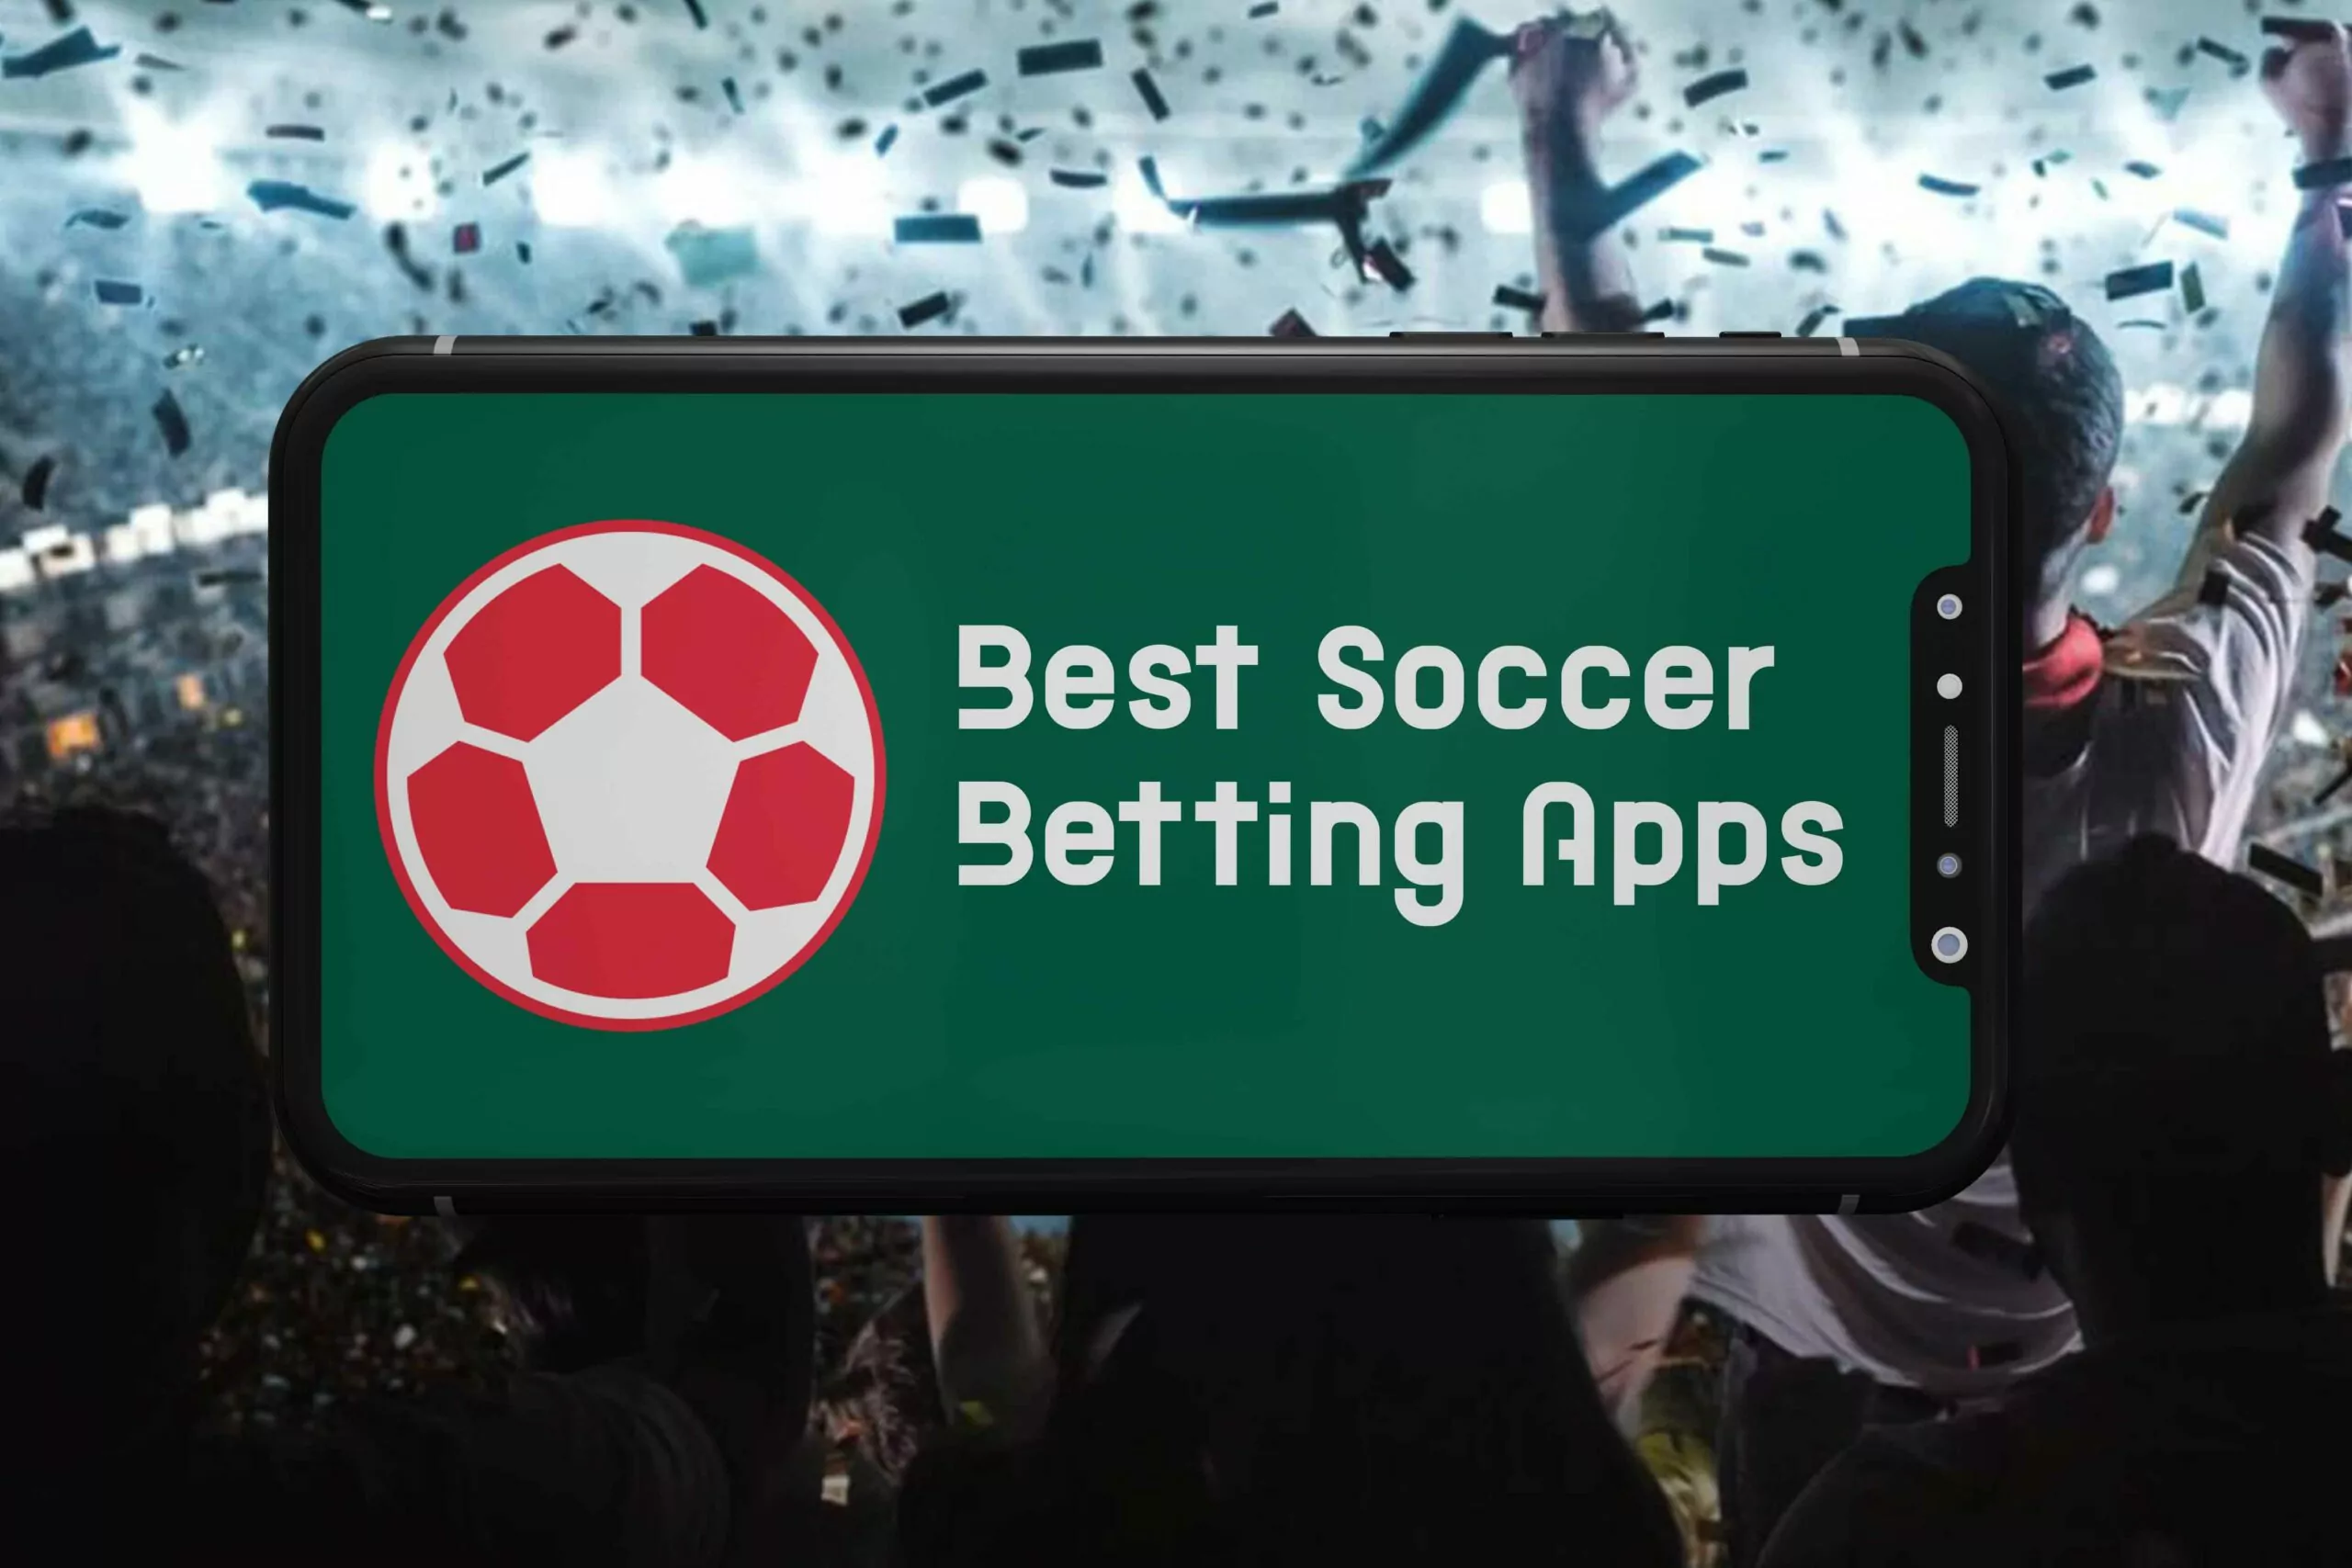 You can choose best soccer betting app for yourself.